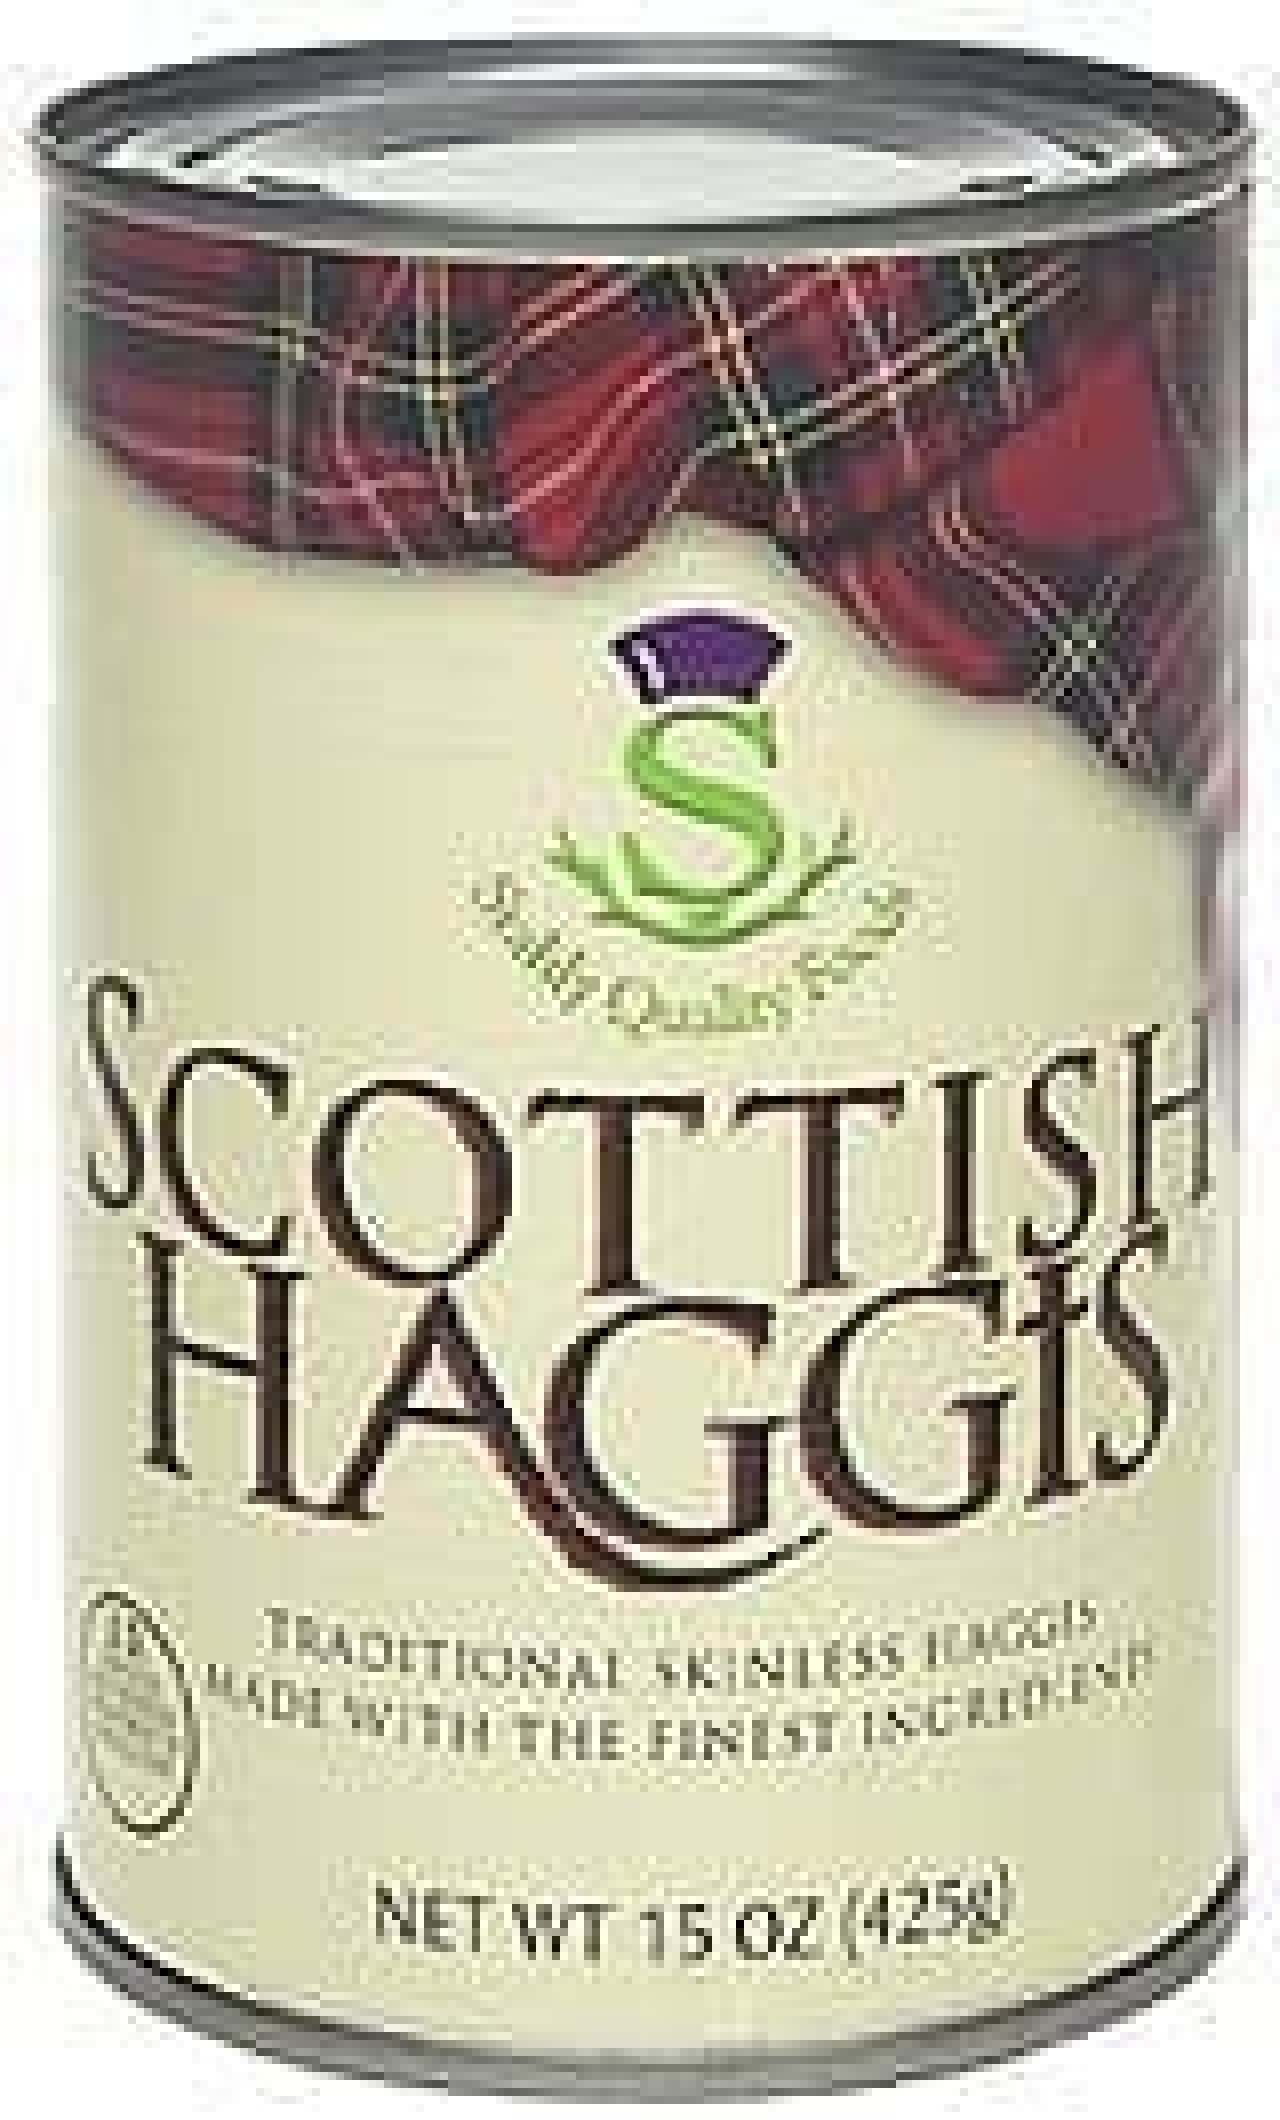 Haggis also has canned food